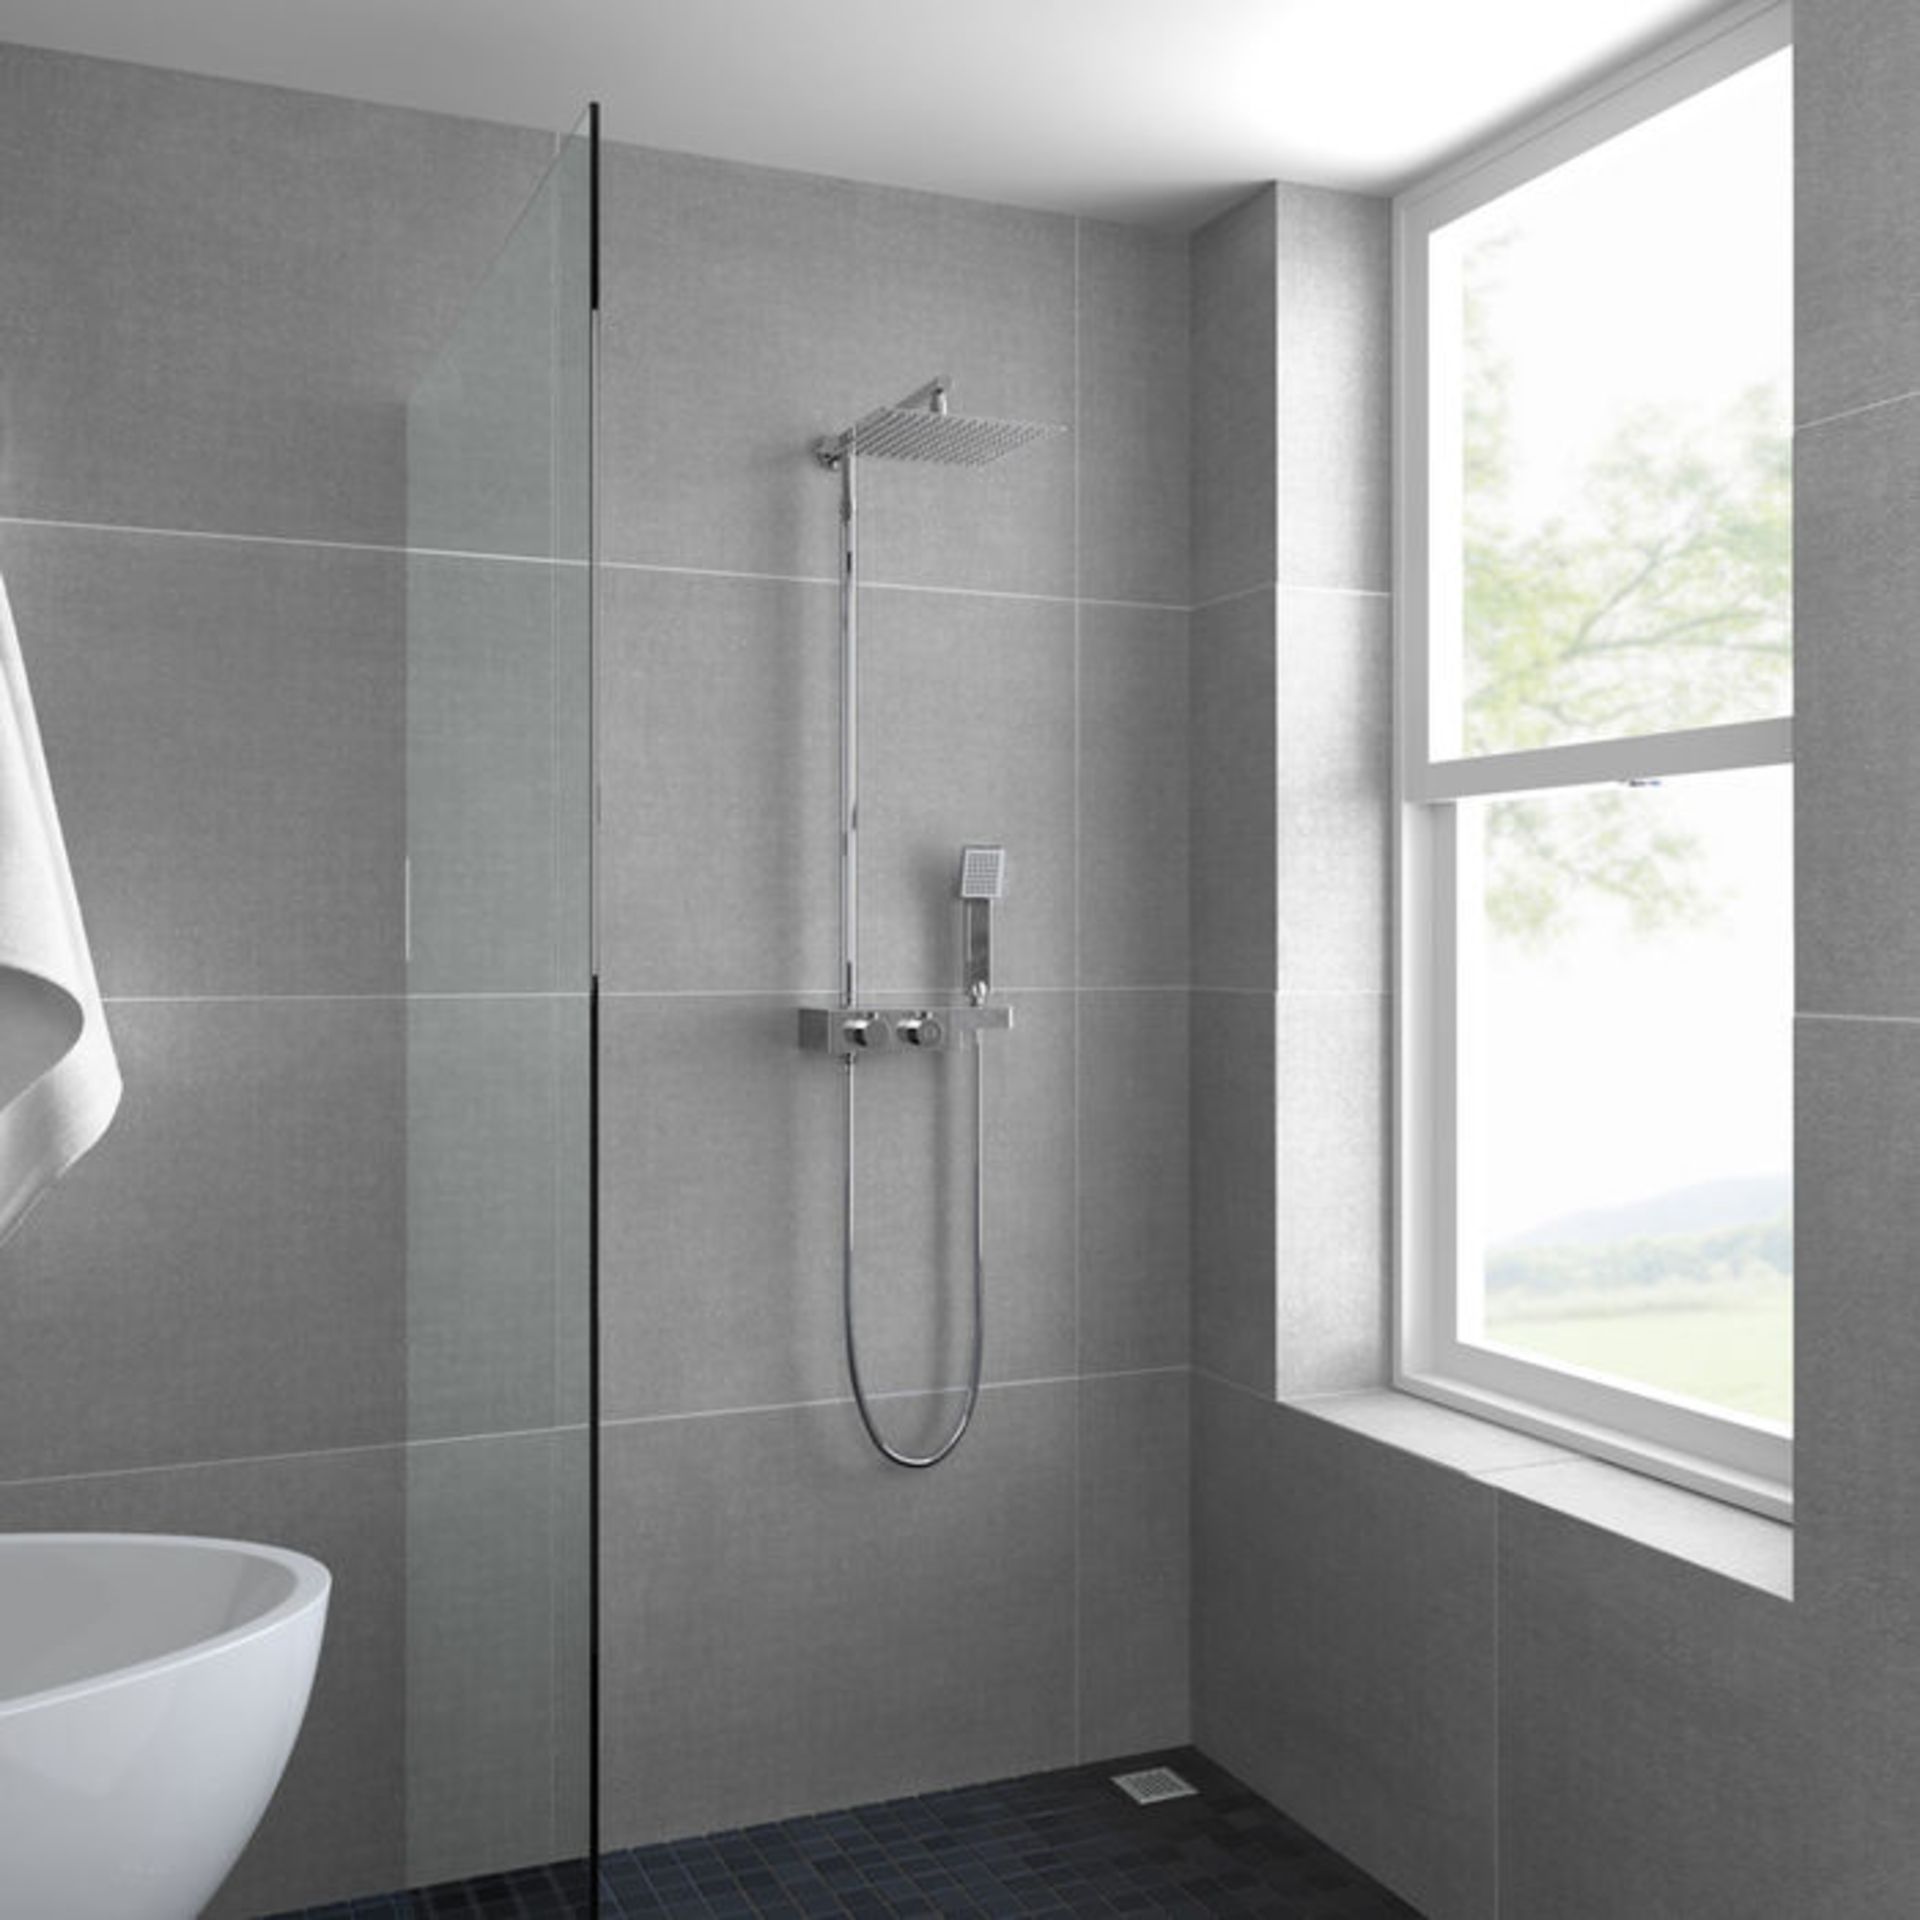 (S43) Square Exposed Thermostatic Shower Shelf, Kit & Large Head RRP £349.99 Style meets function - Image 3 of 6